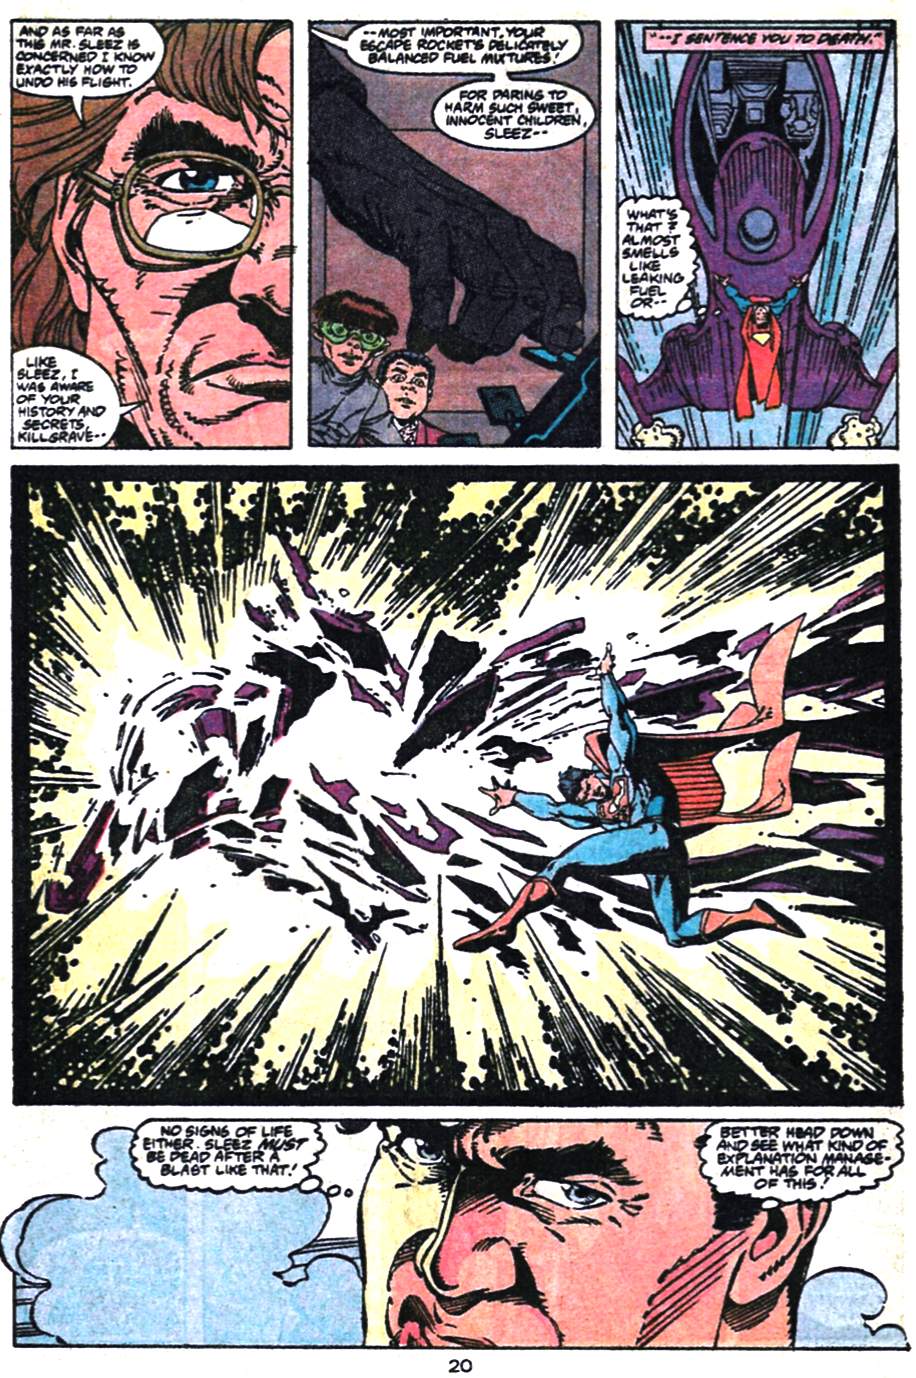 Adventures of Superman (1987) 475 Page 20